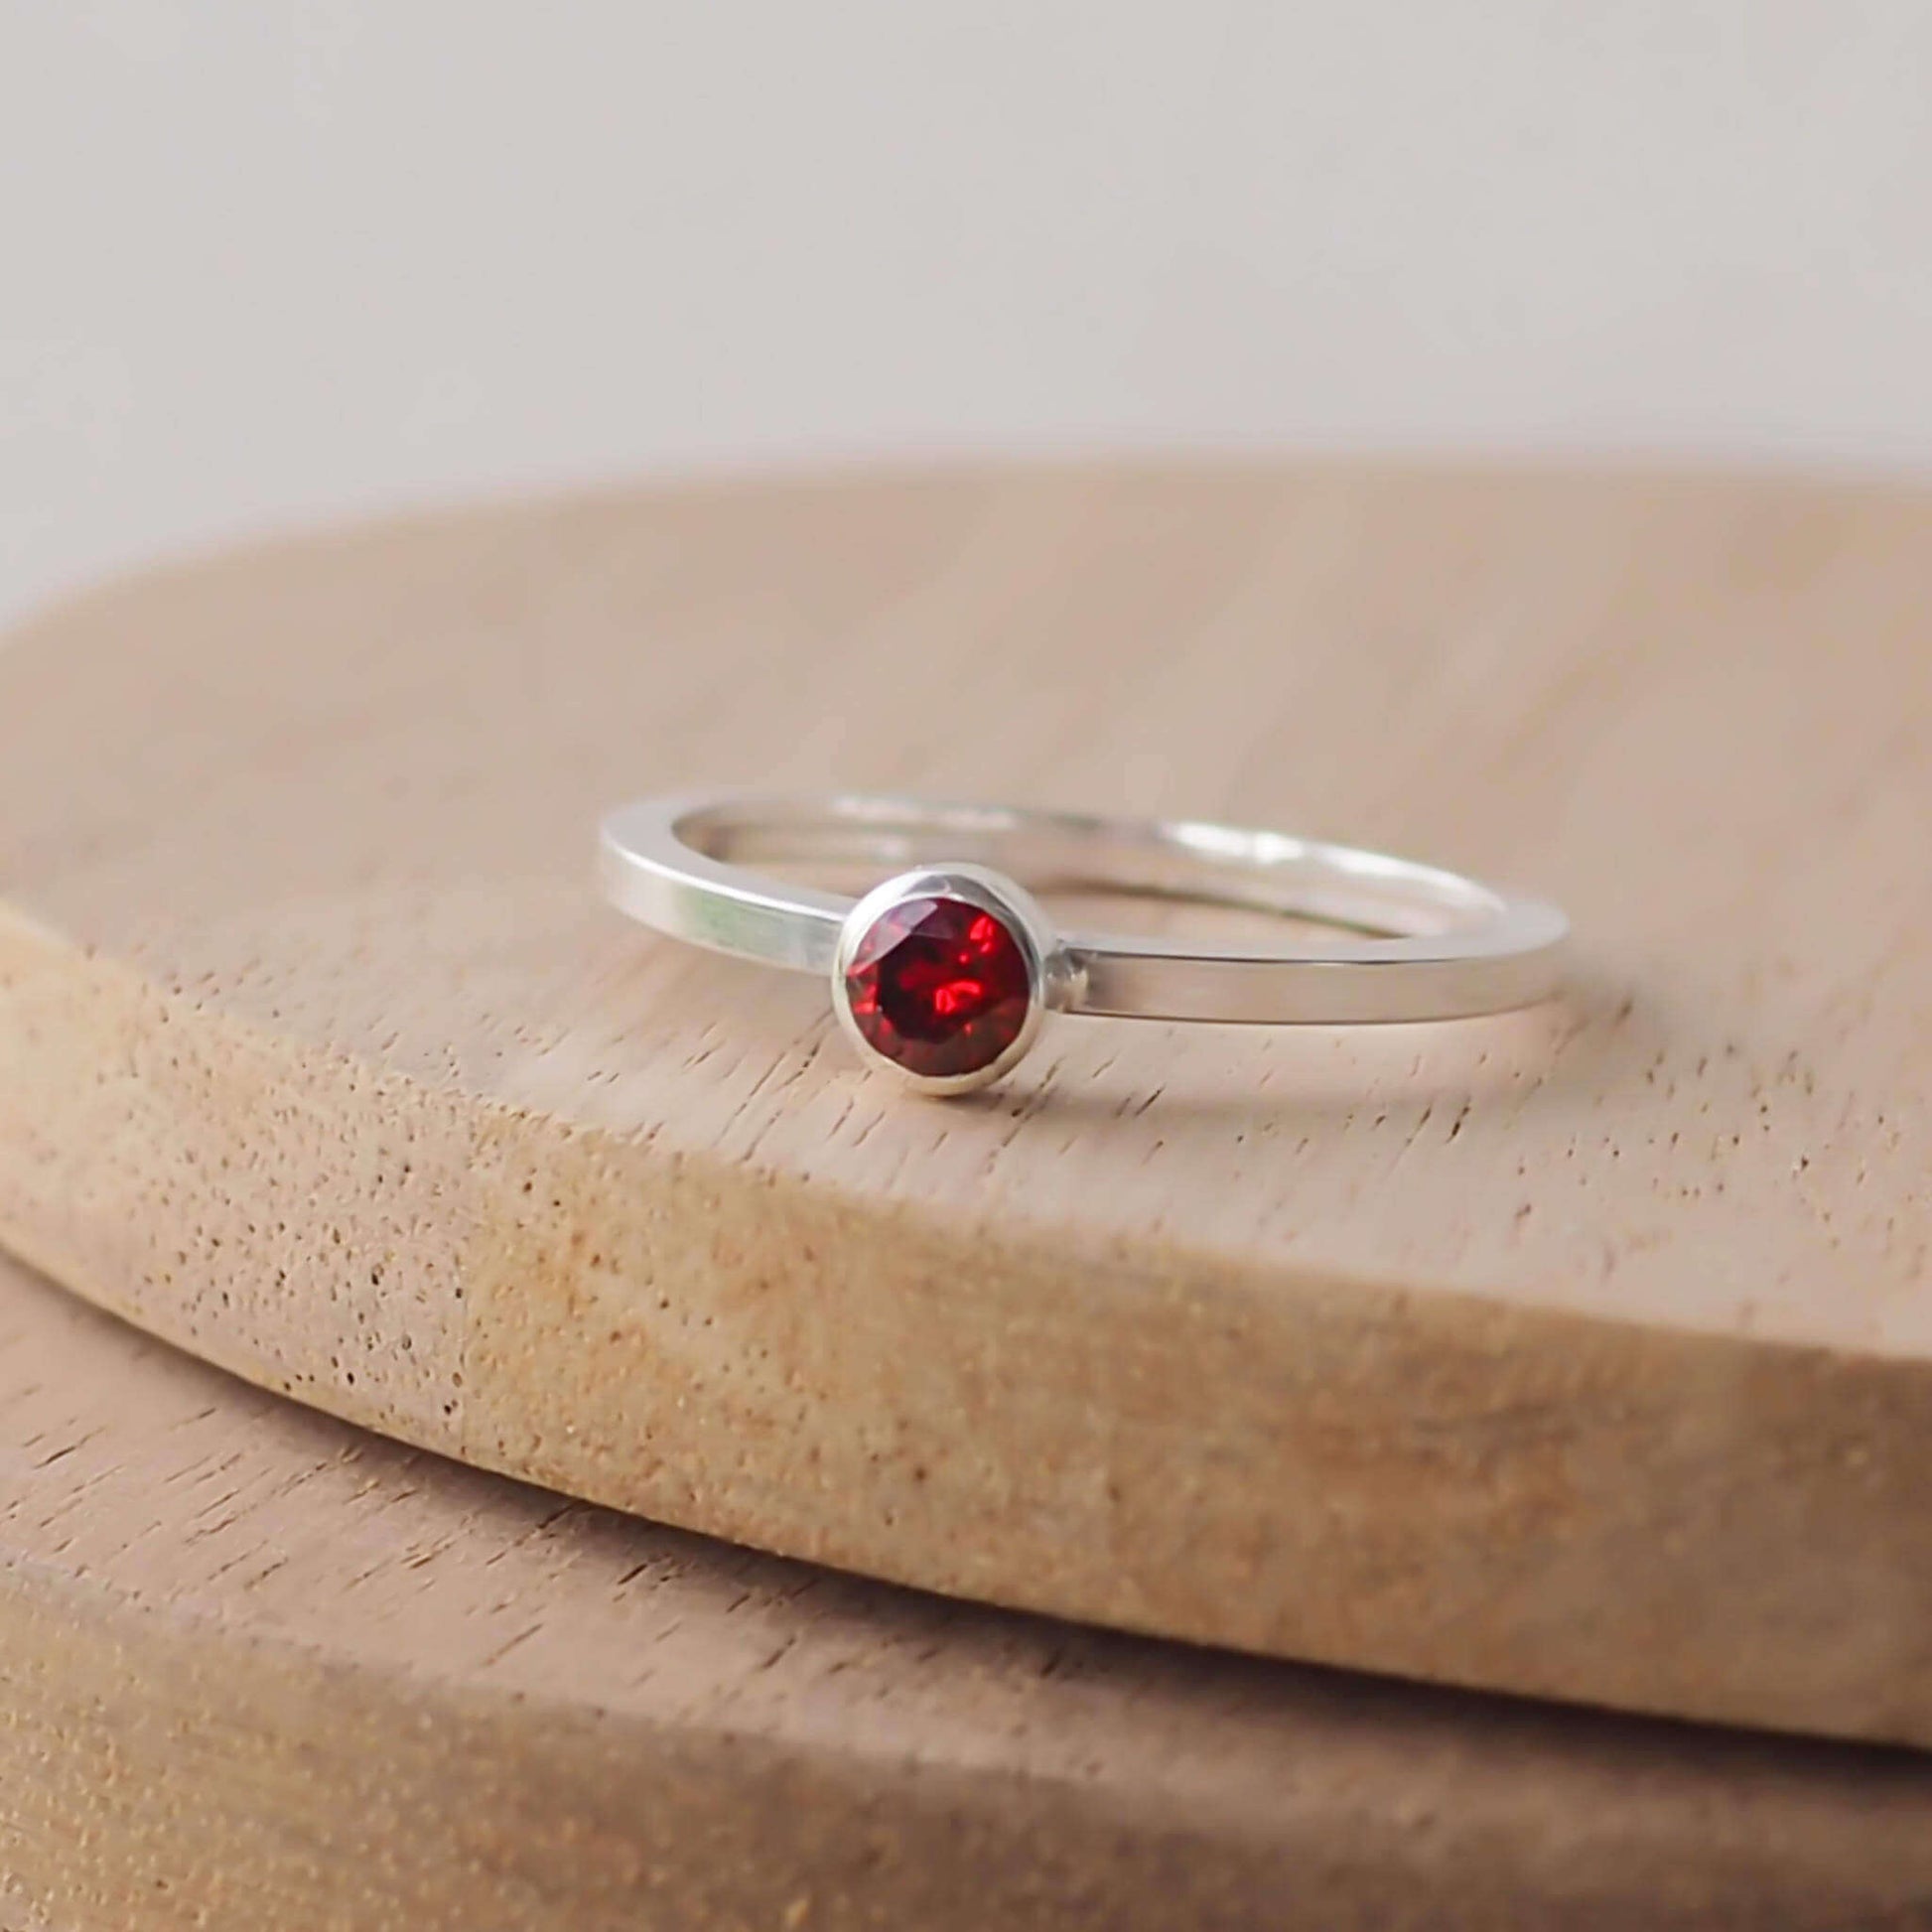 Garnet and Sterling Silver solitaire ring with a deep red coloured round cubic zirconia measuring 4mm in size. A very simple minimalist ring made from Sterling Silver on a minimalist square style band.Garnet is the birthstone for January. Handmade in Scotland by maram jewellery